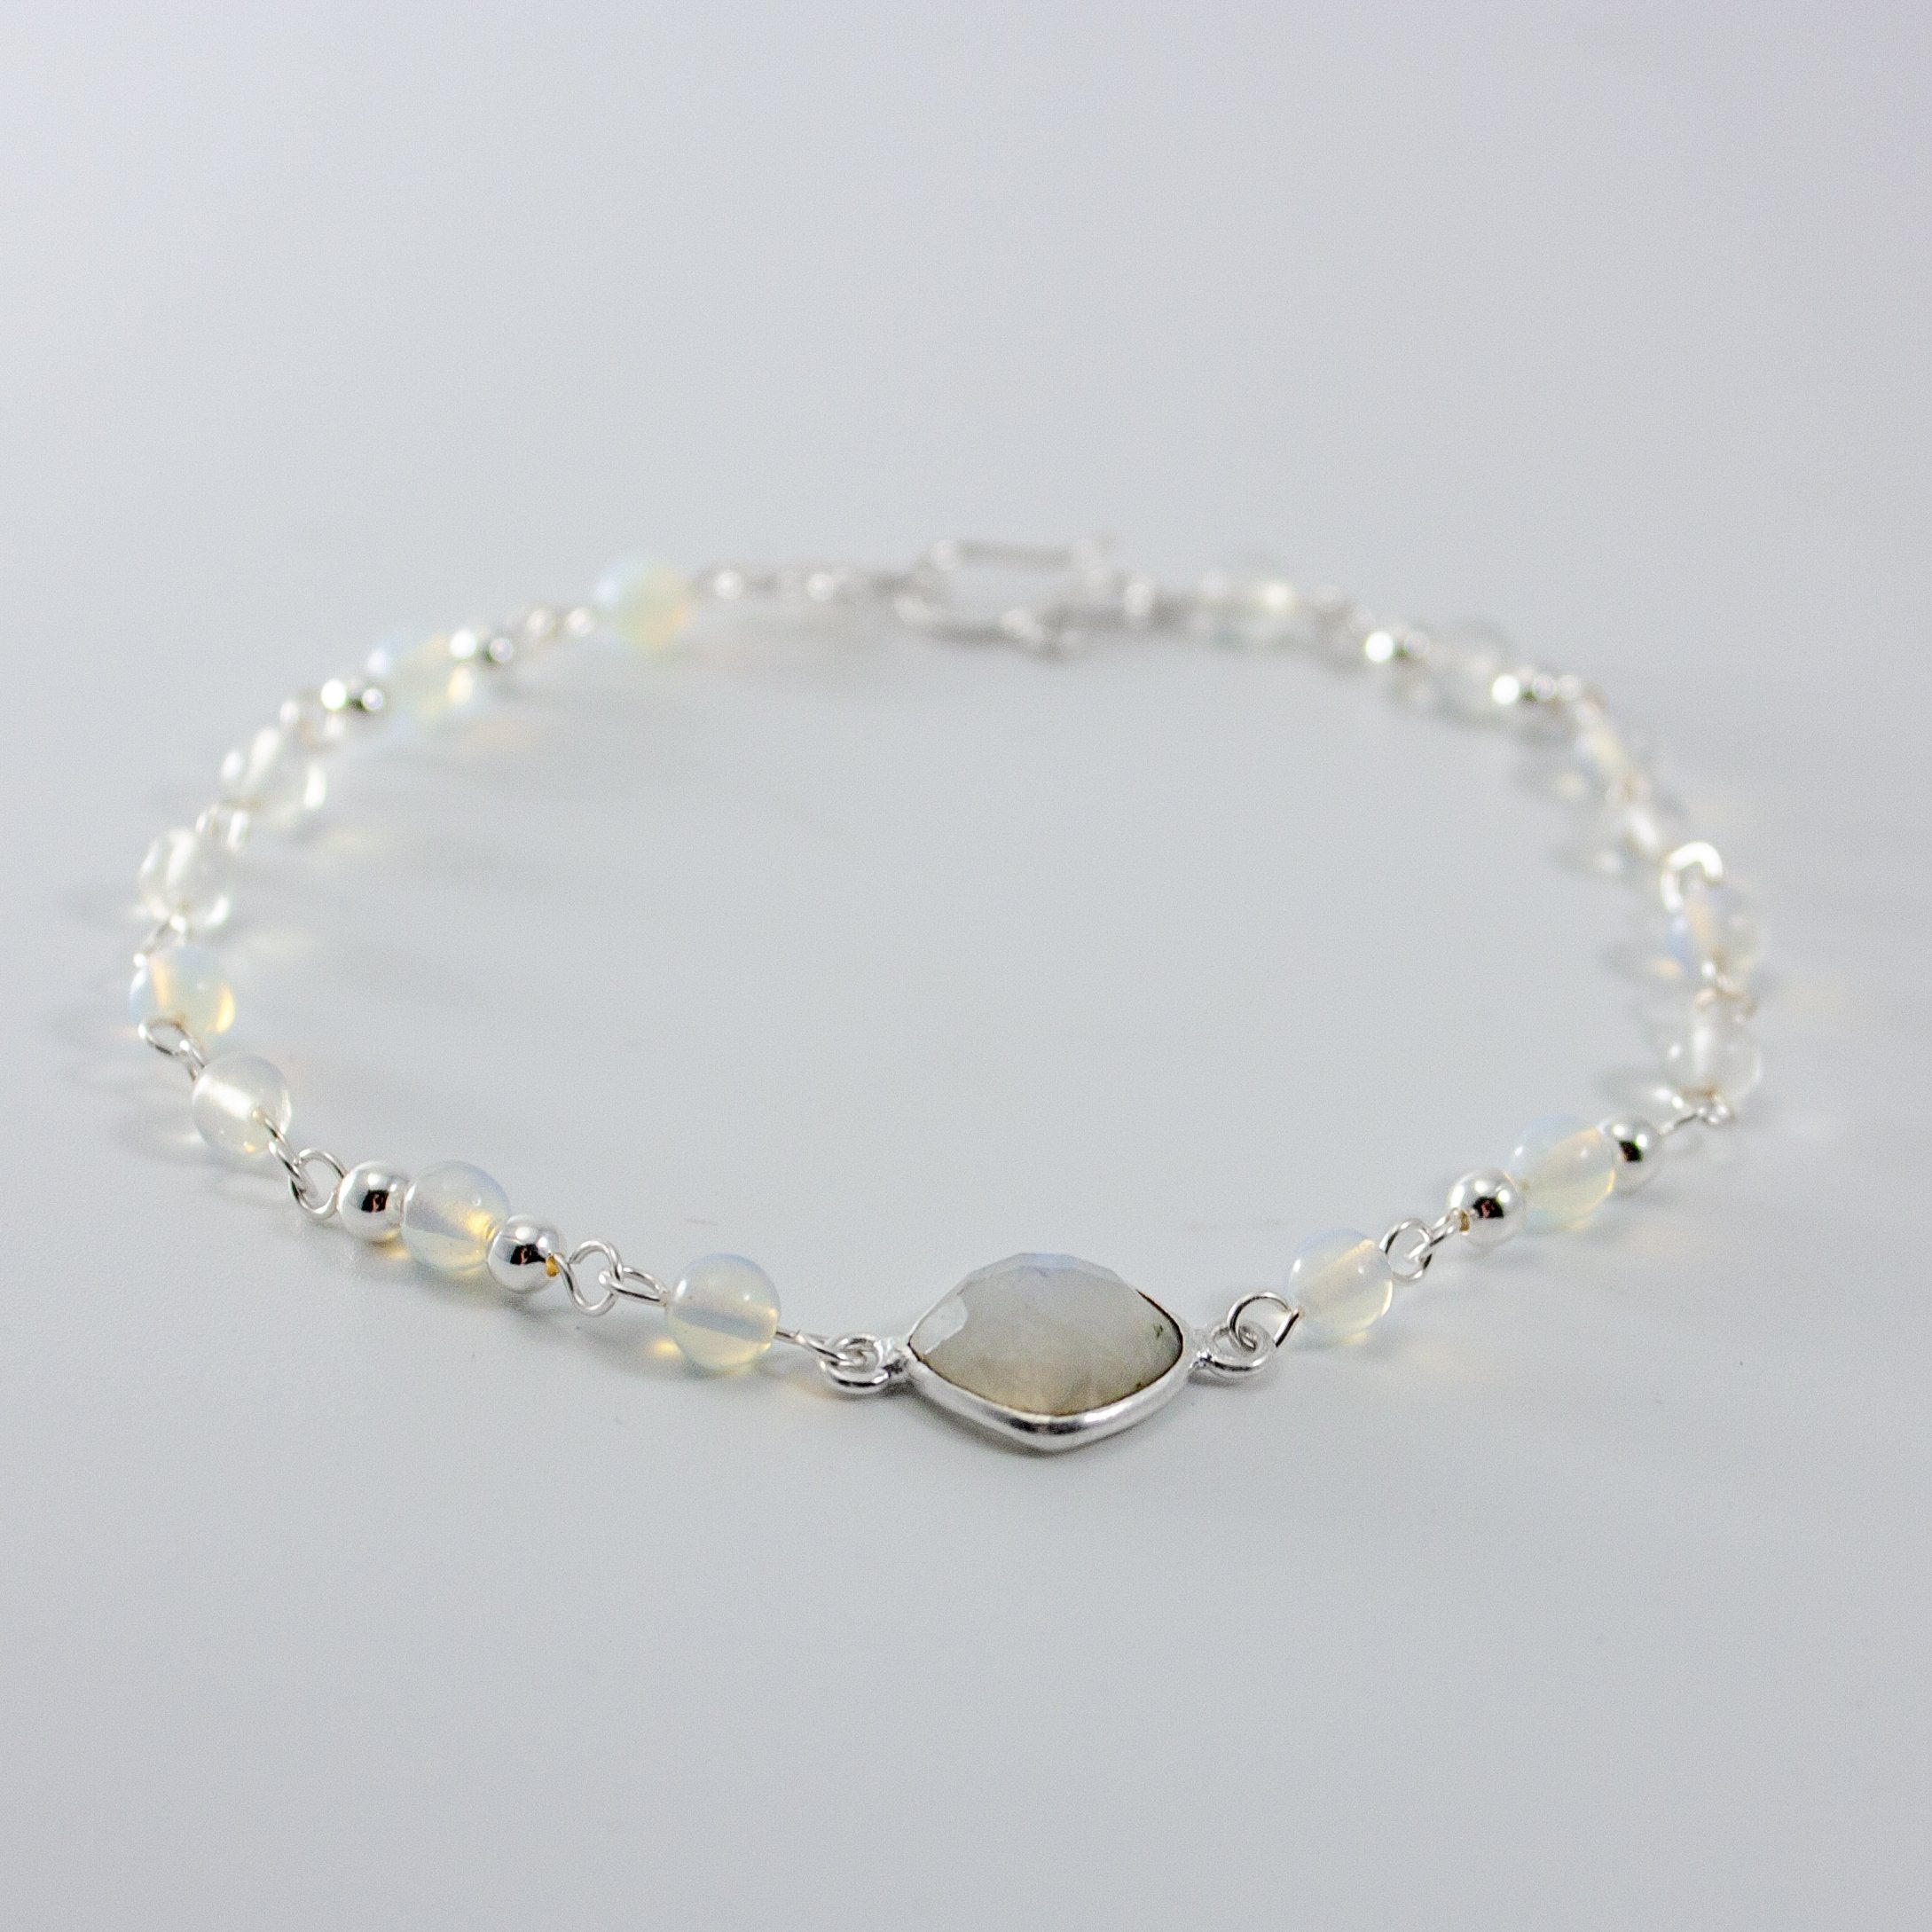 Rainbow Moonstone and Opalite Silver Chain Bracelet - 10mm Cushion Cabochon - Jewelry & Watches - Bijou Her -  -  - 